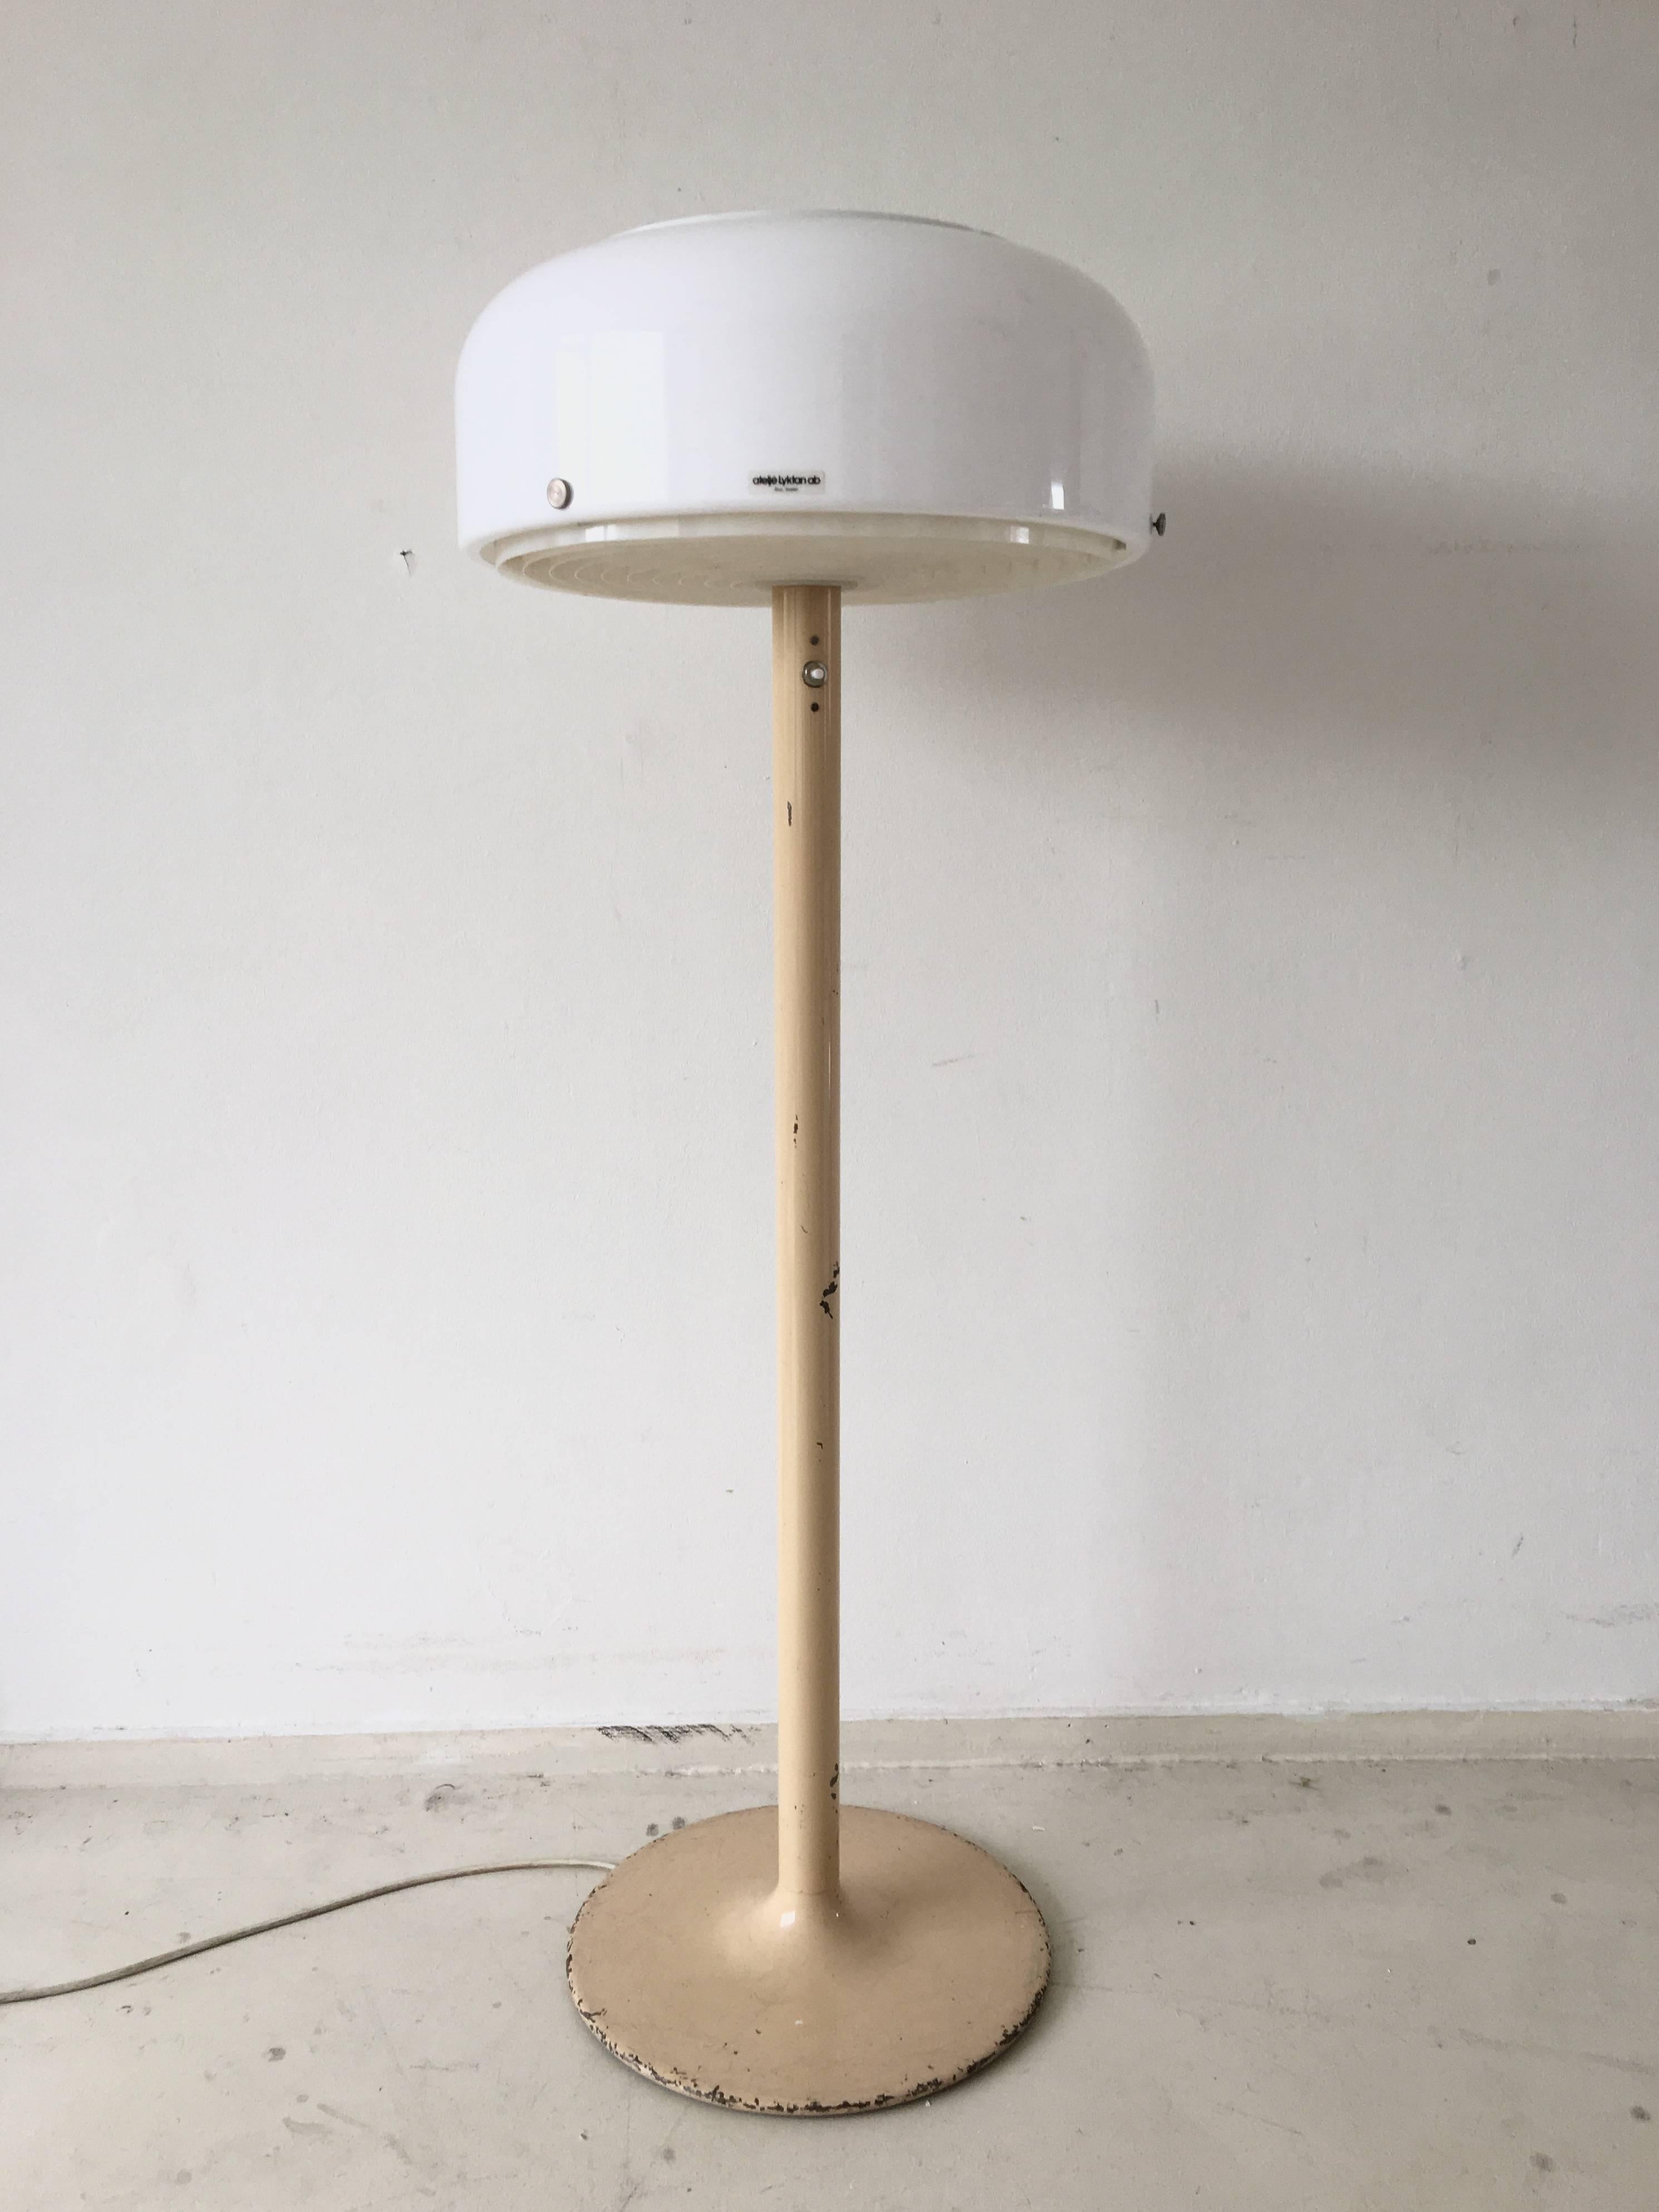 This Swedish Industrial floor lamp was designed by Anders Pehrson, circa 1970s. It features a cream lacquered metal base with a white acrylic shade. Inside the shade, a plastic ring ensures a good distribution of the light.
The lamp remains in good